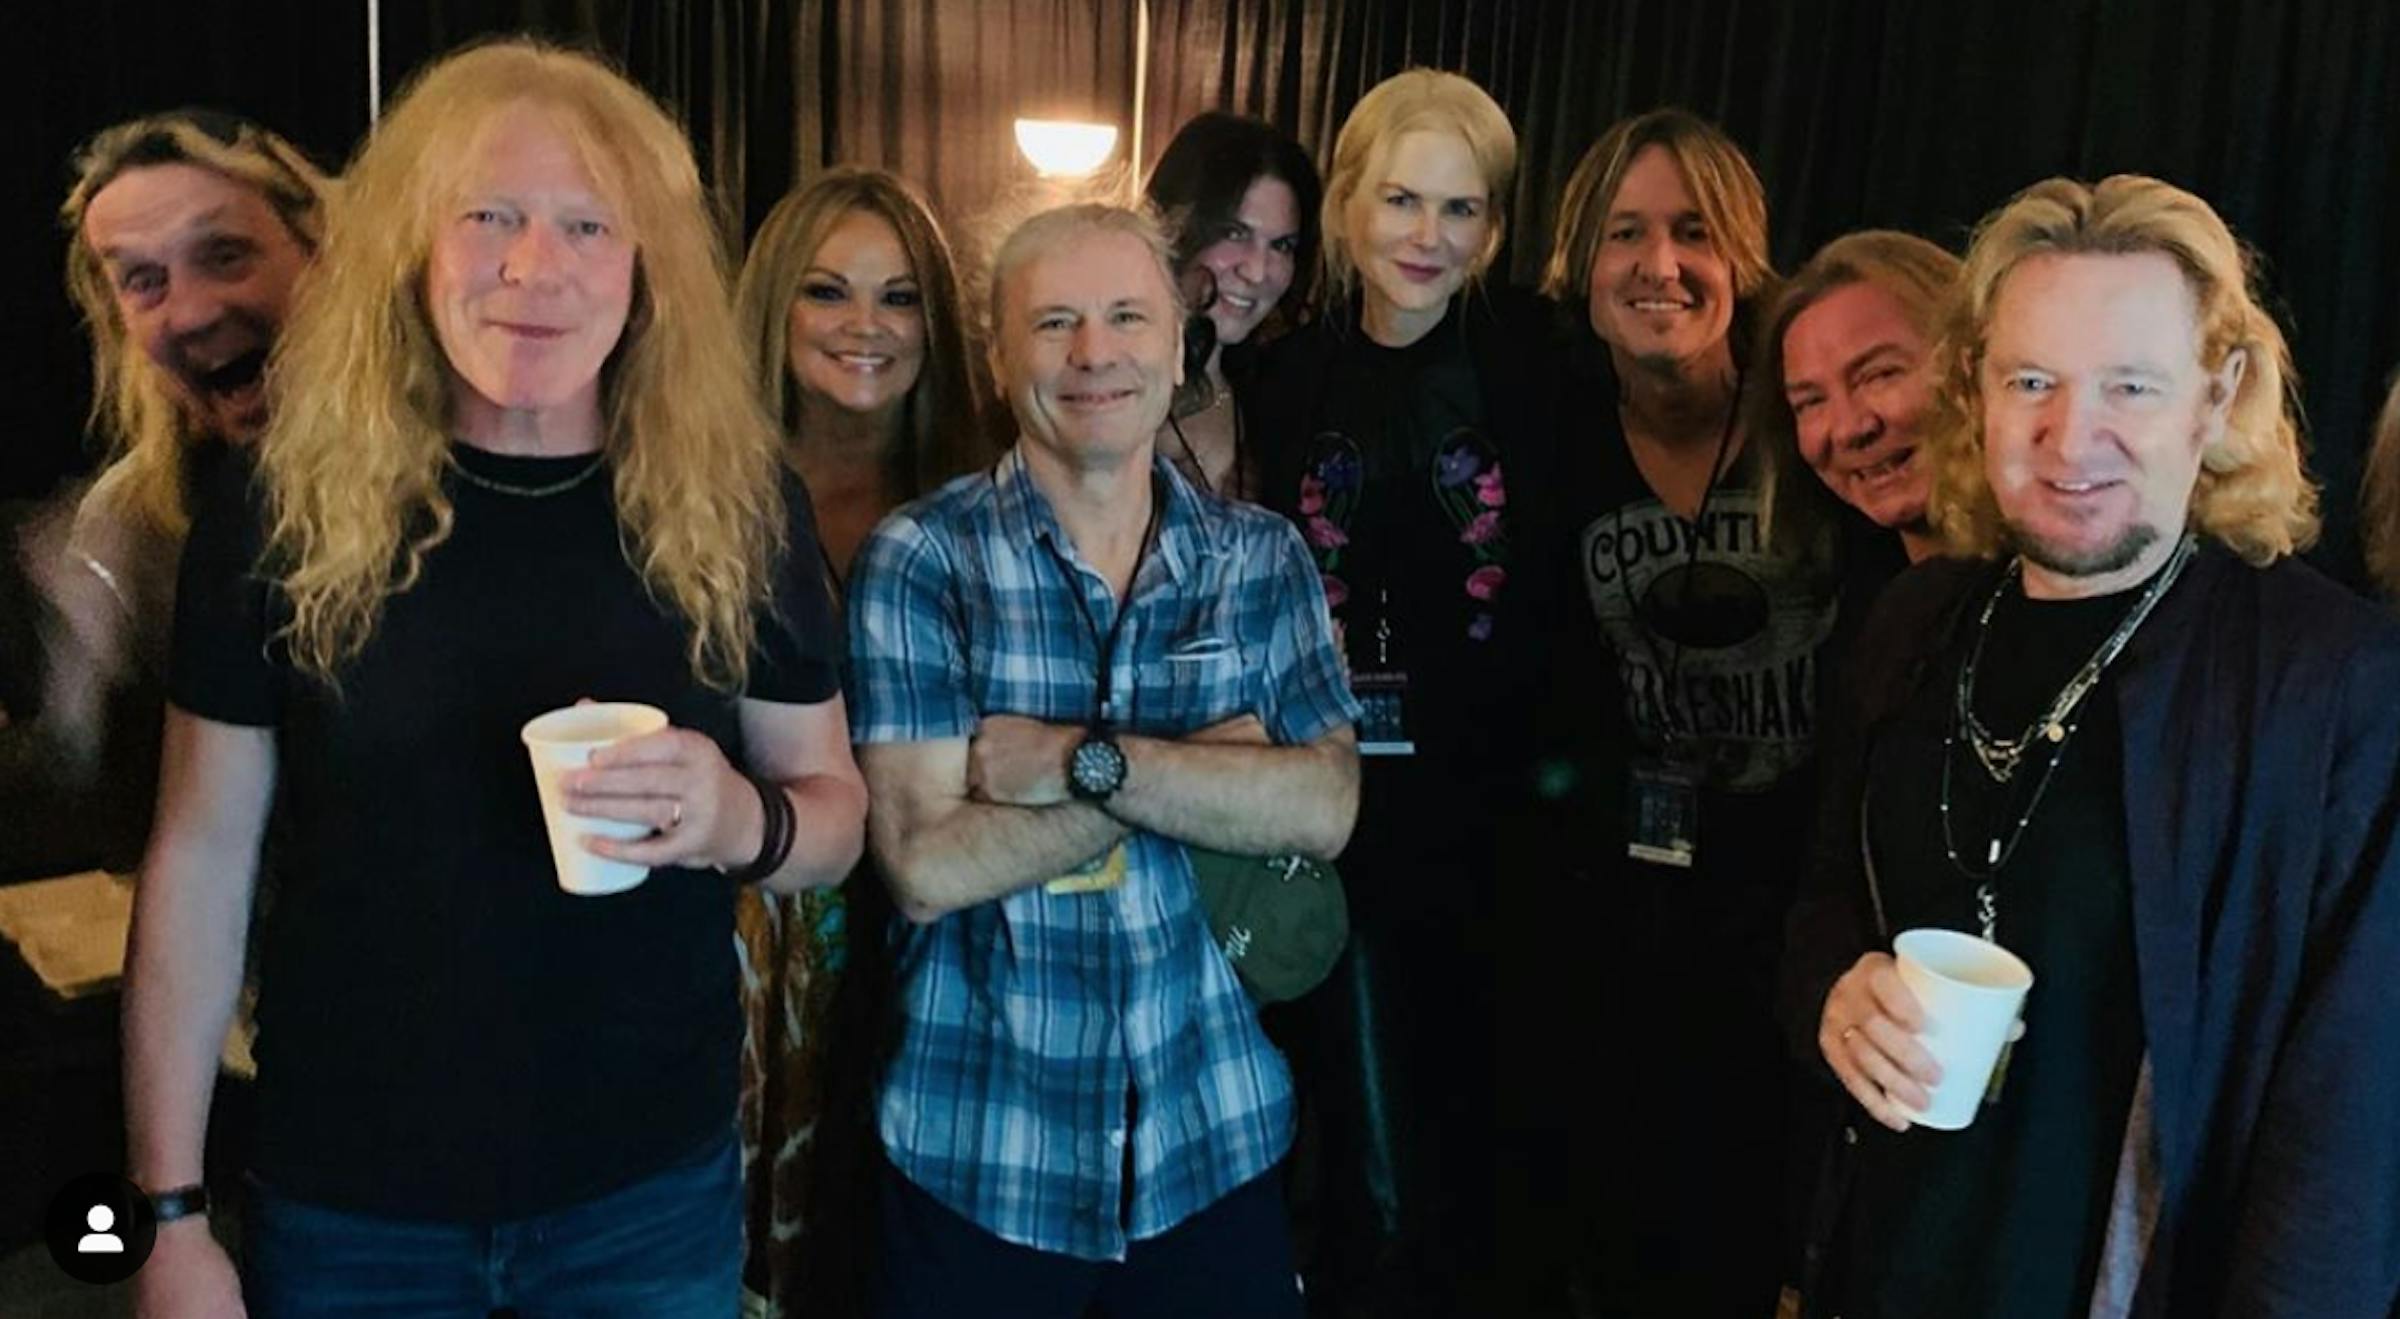 Keith Urban and Nicole Kidman Attended An Iron Maiden Show